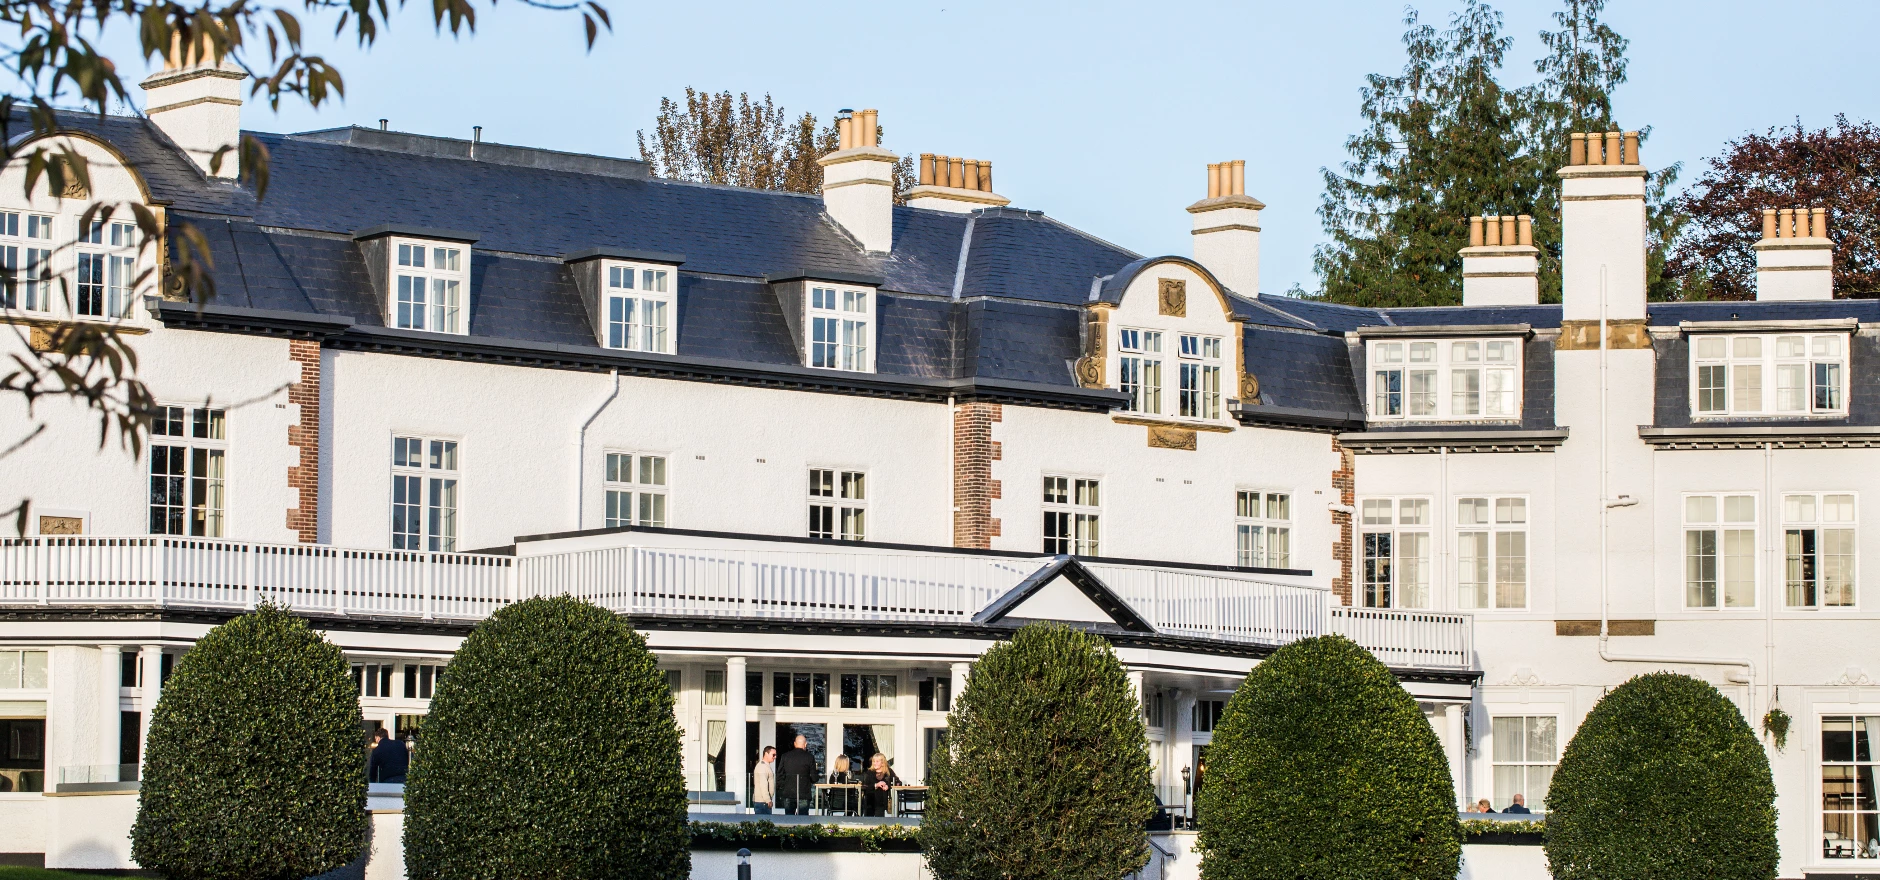 The Ripon Inn - transformed by Silverstone Building Consultancy on behalf of the Inn Collection Group